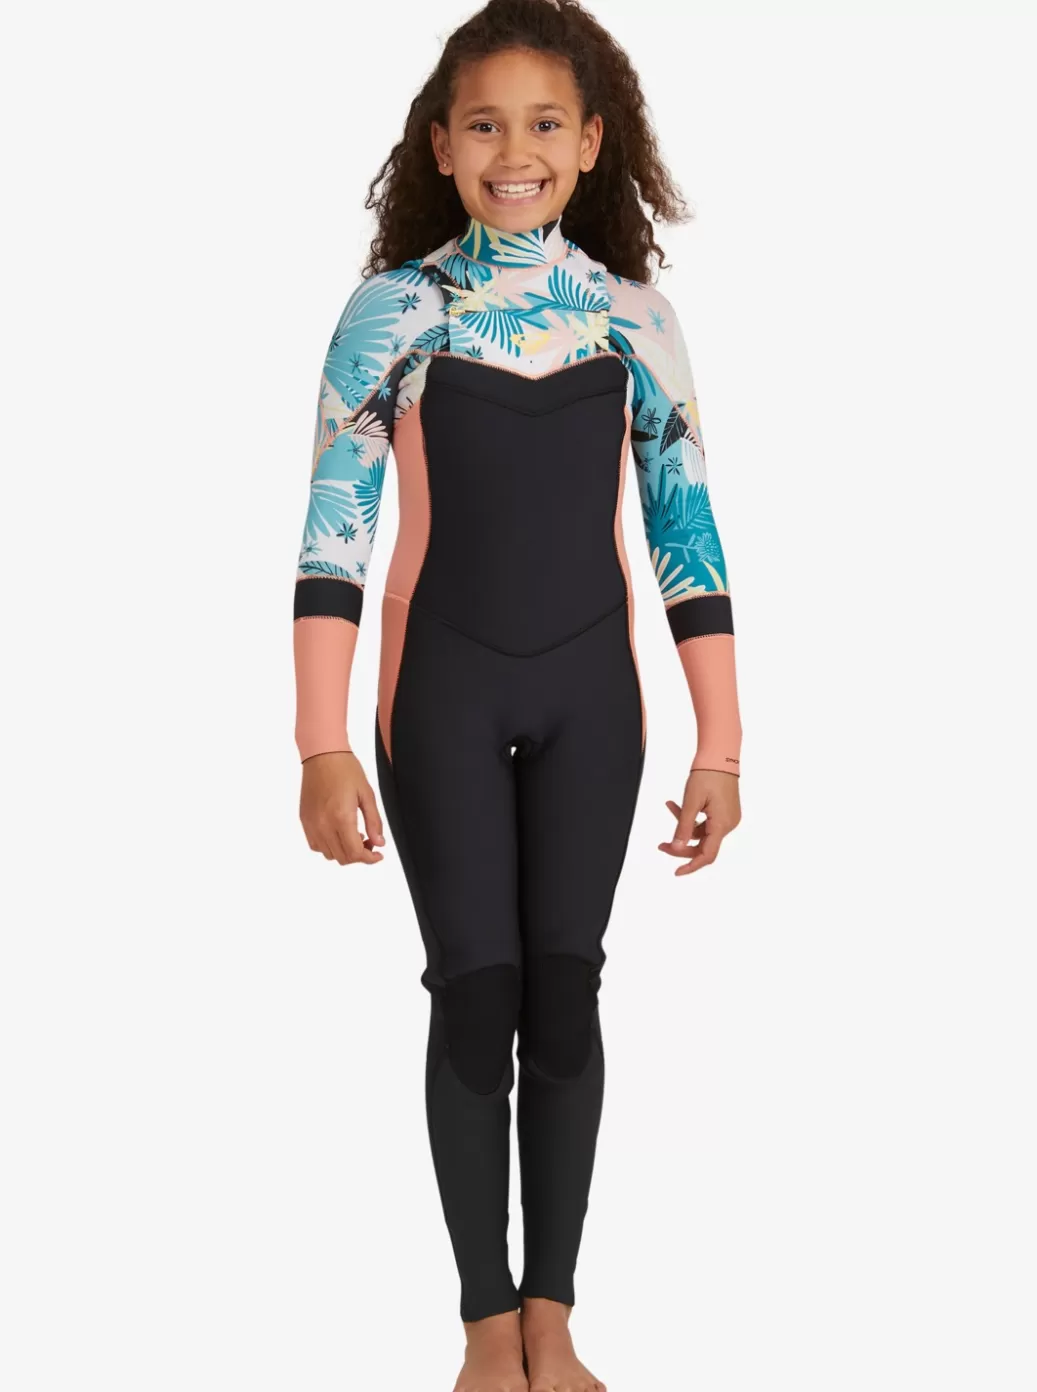 Surf | KIDS ROXY 3/2mm Syncro - Chest Zip Wetsuit for Girls Black/pale Coral/butter